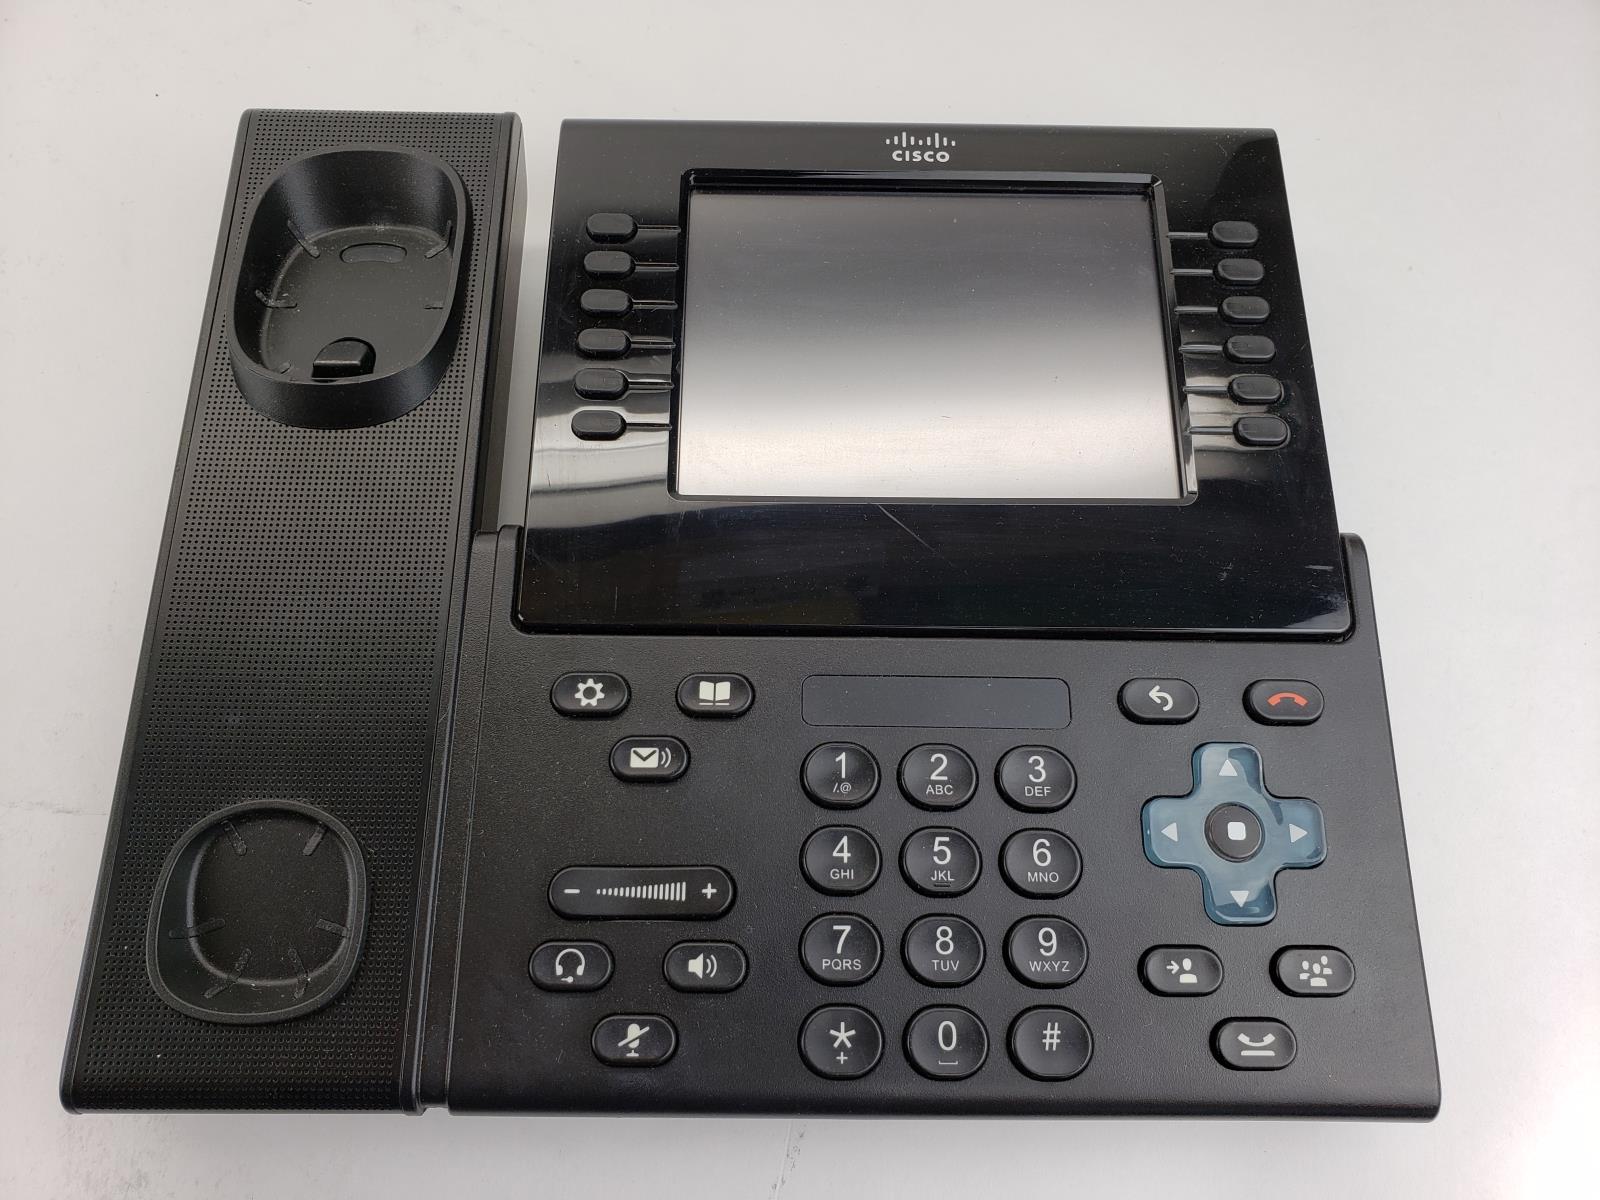 Cisco CP-9971-C-K9 Unified IP Phone 6 Line Colour USB SIP w// CP-CAM-C /& Stand